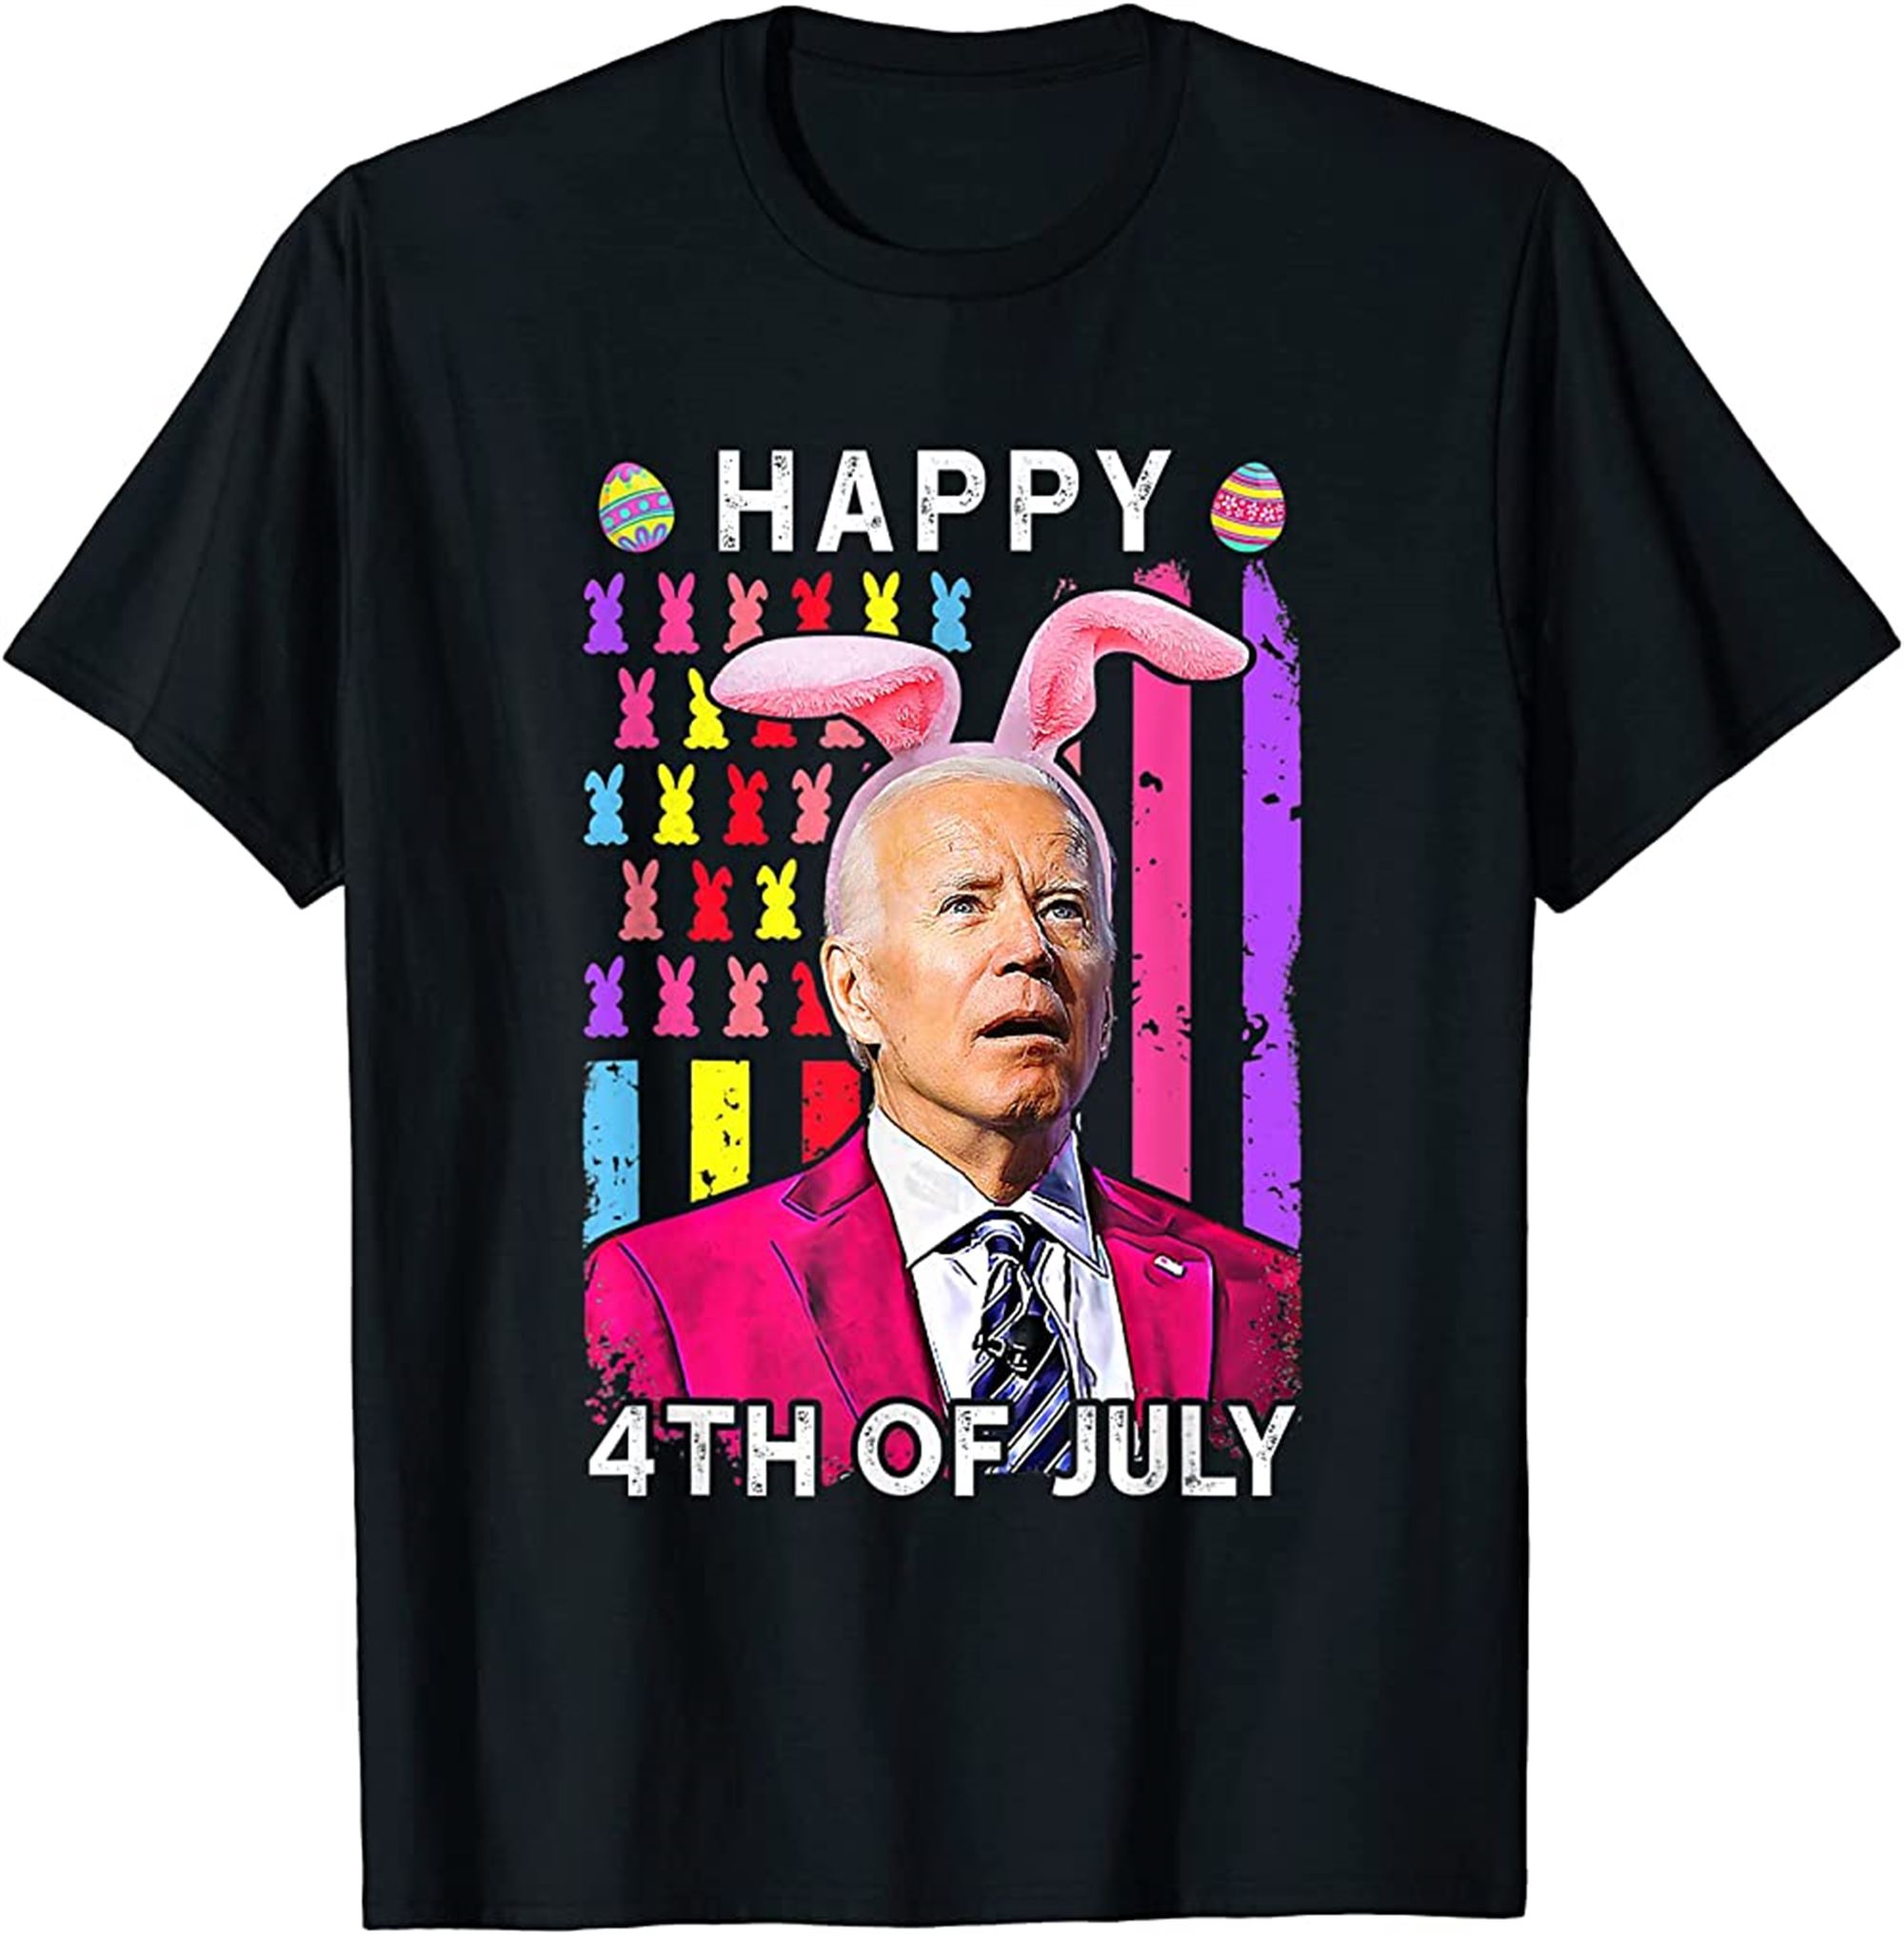 Happy 4th Of July Easter Bunny Biden Vintage American T-shirt Full Size Up To 5xl